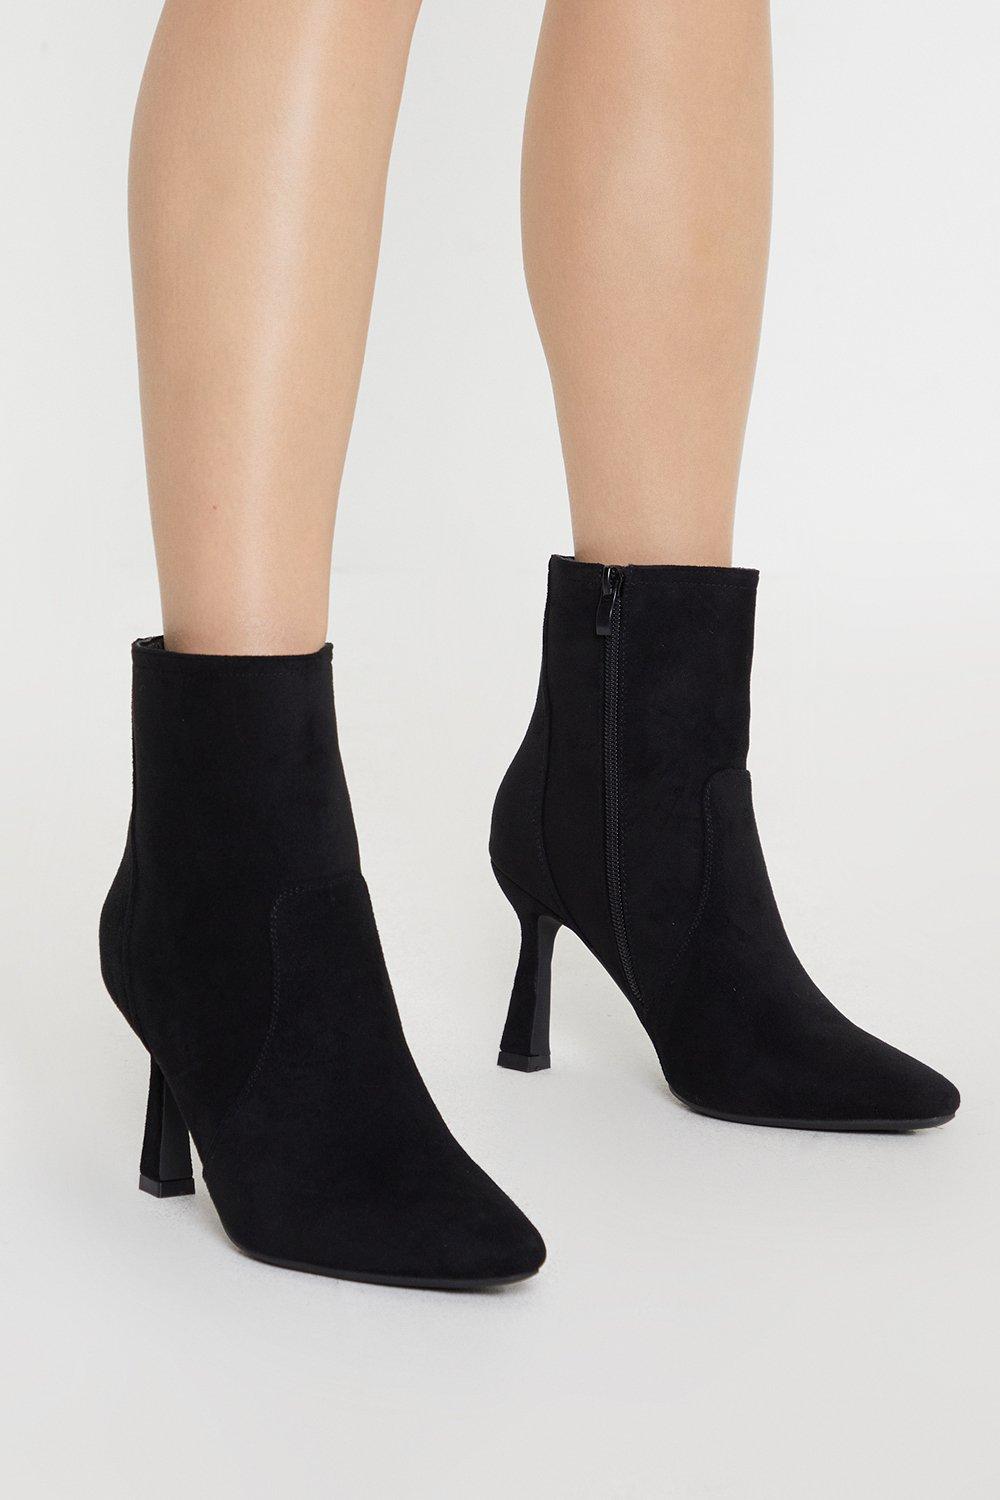 Women’s Faith: Mira Pointed Formal Ankle Boots - black - 7